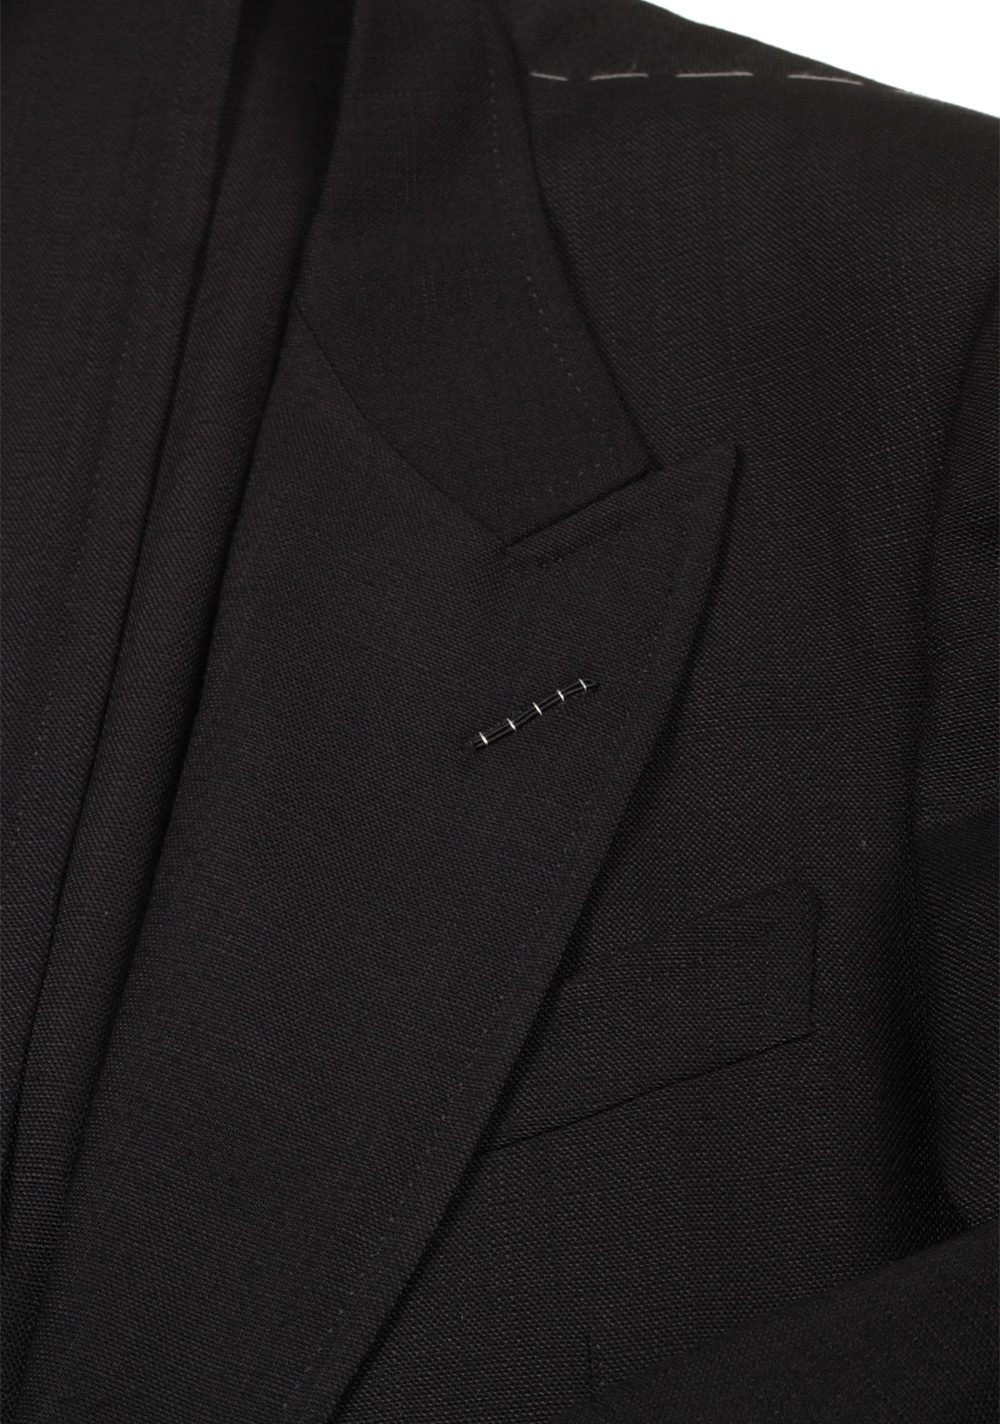 TOM FORD Shelton Black Sport Coat Size 54 / 44R U.S. In Rayon | Costume Limité